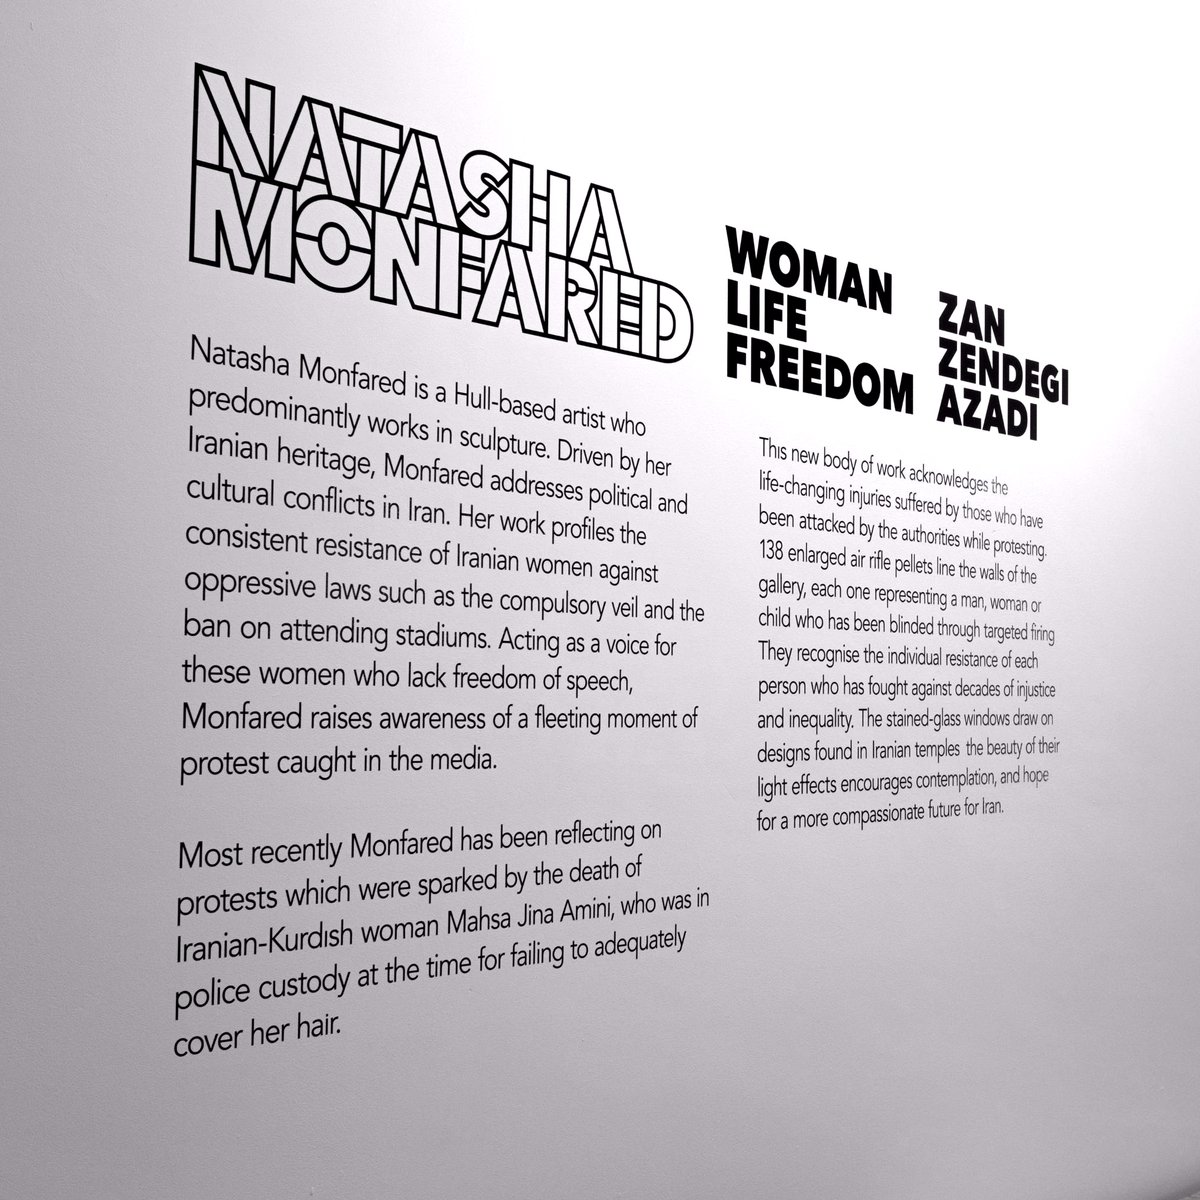 Passionate about local artists? Us too! At Artlink Hull, we shine a spotlight on our city's incredible talent. Check out @87gallery for @NatashaMakesArt powerful exhibition, 'Woman Life Freedom'. #SupportLocalArtists #ArtLinkHull